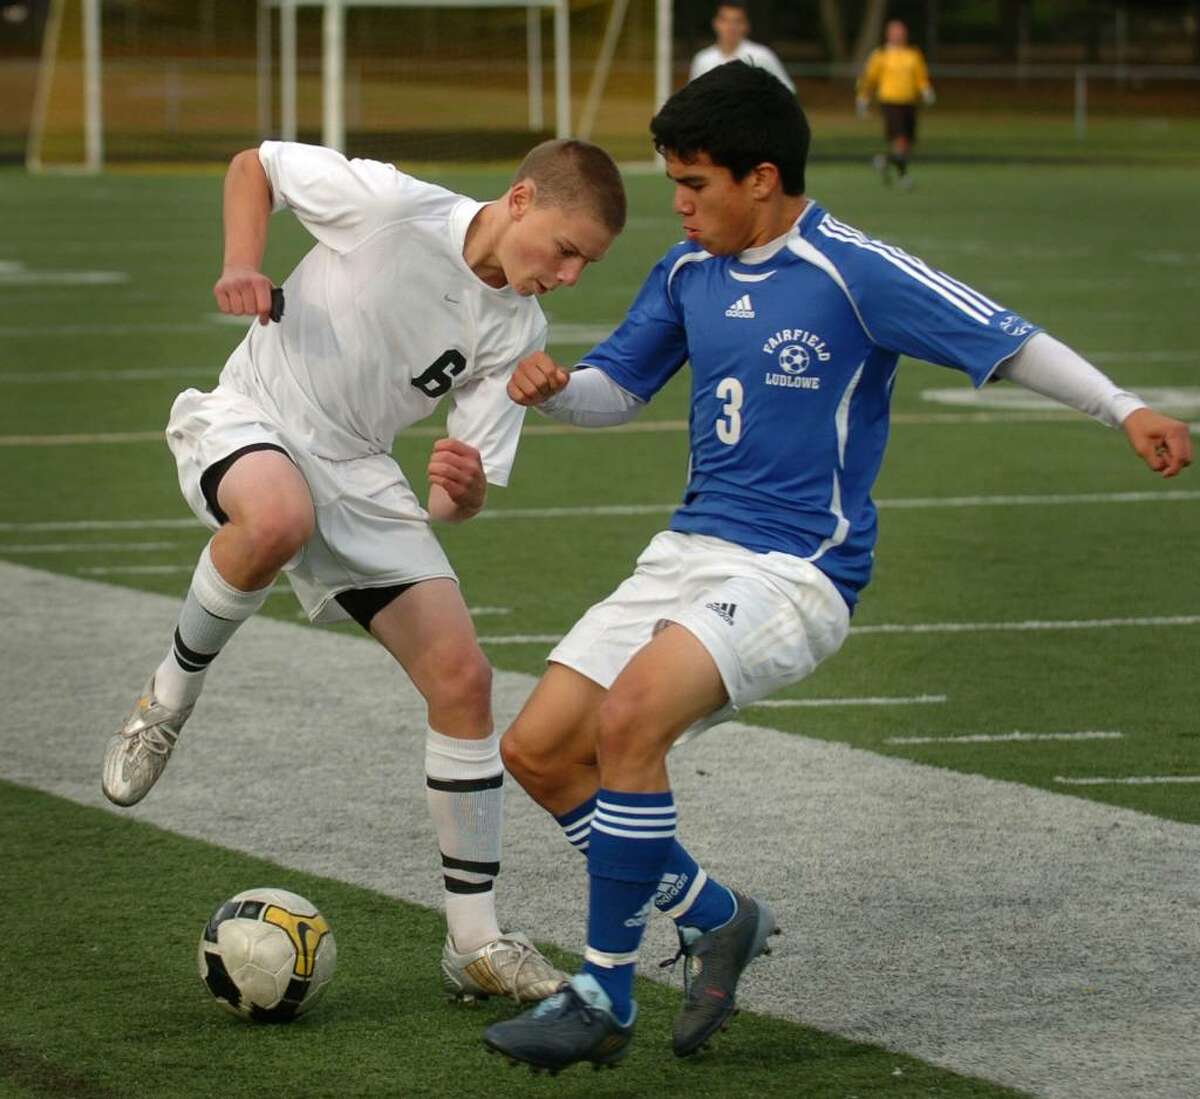 Trumbull's John Sullivan, left, works to keep the ball away from Fairfield Ludlowe attacker Fernando Pabon during Monday's FCIAC matchup at Trumbull High School.